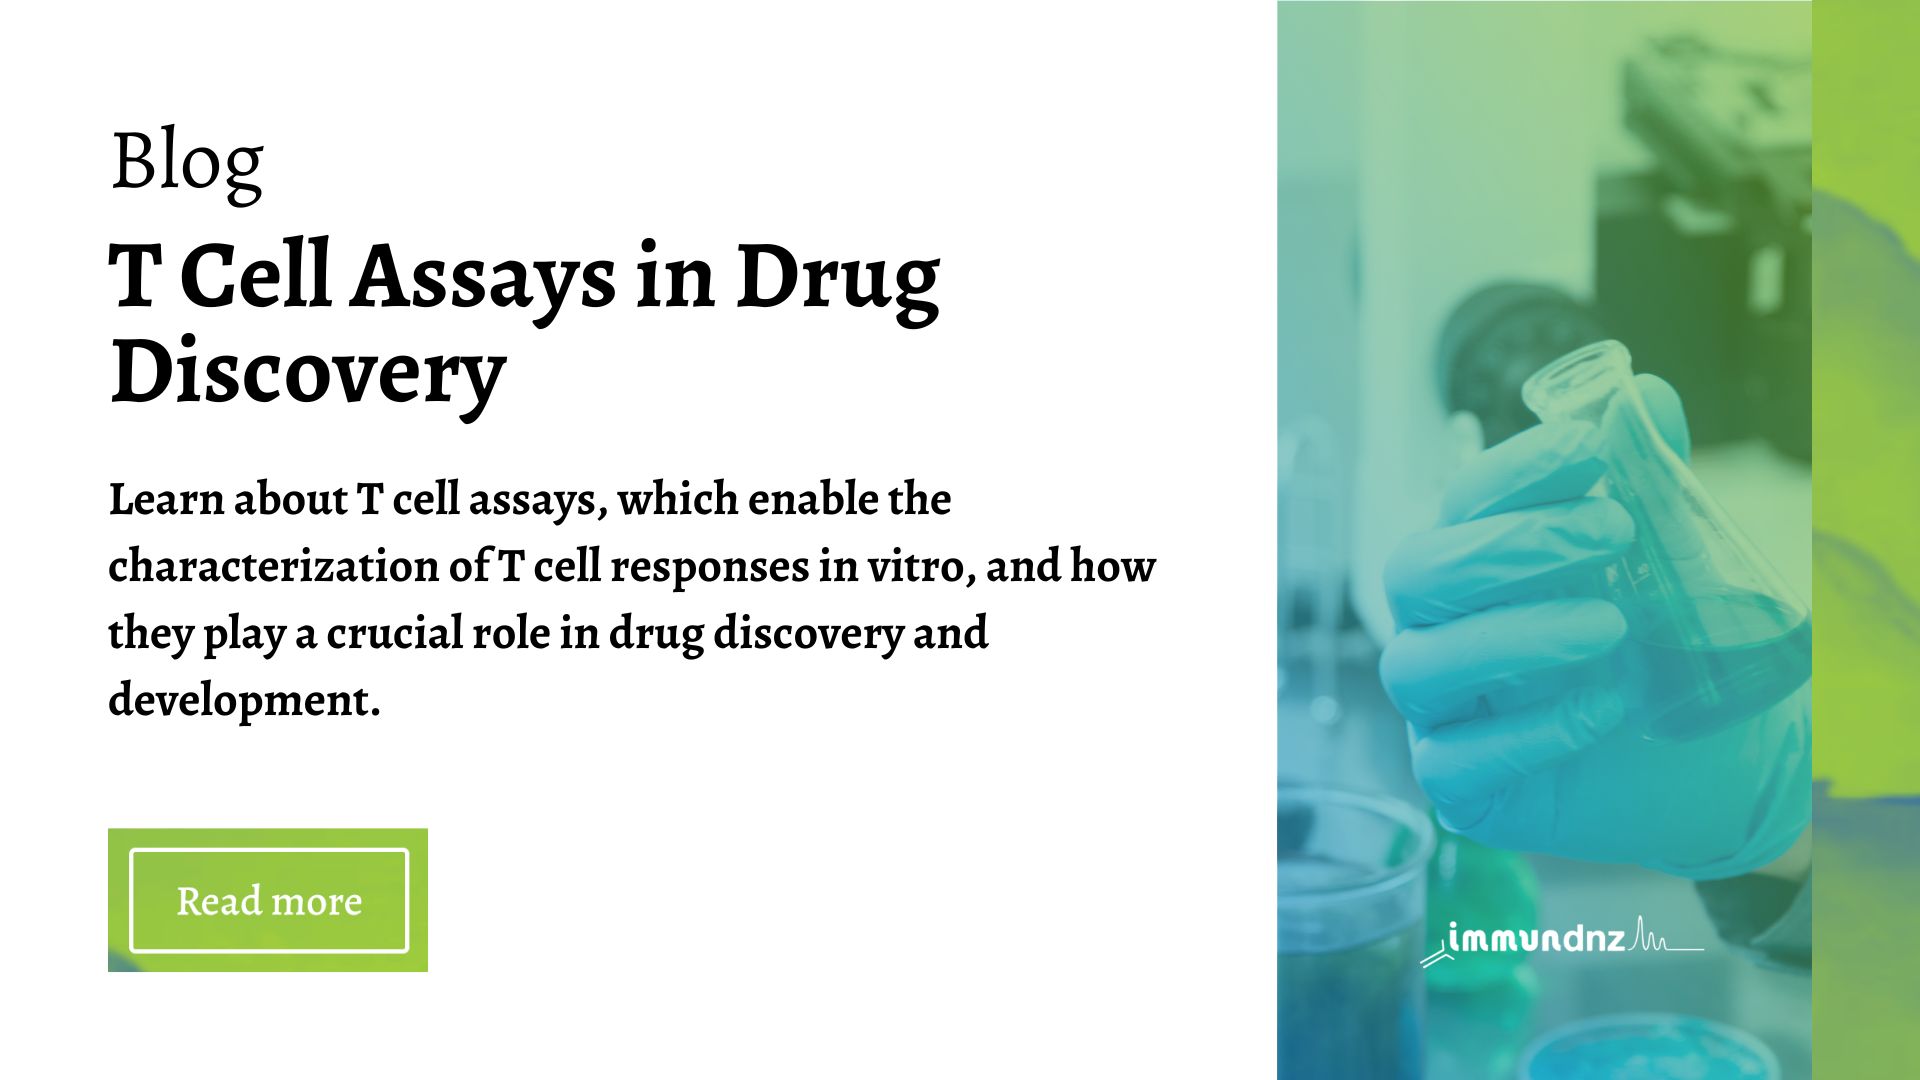 t cell assays in drug discovery